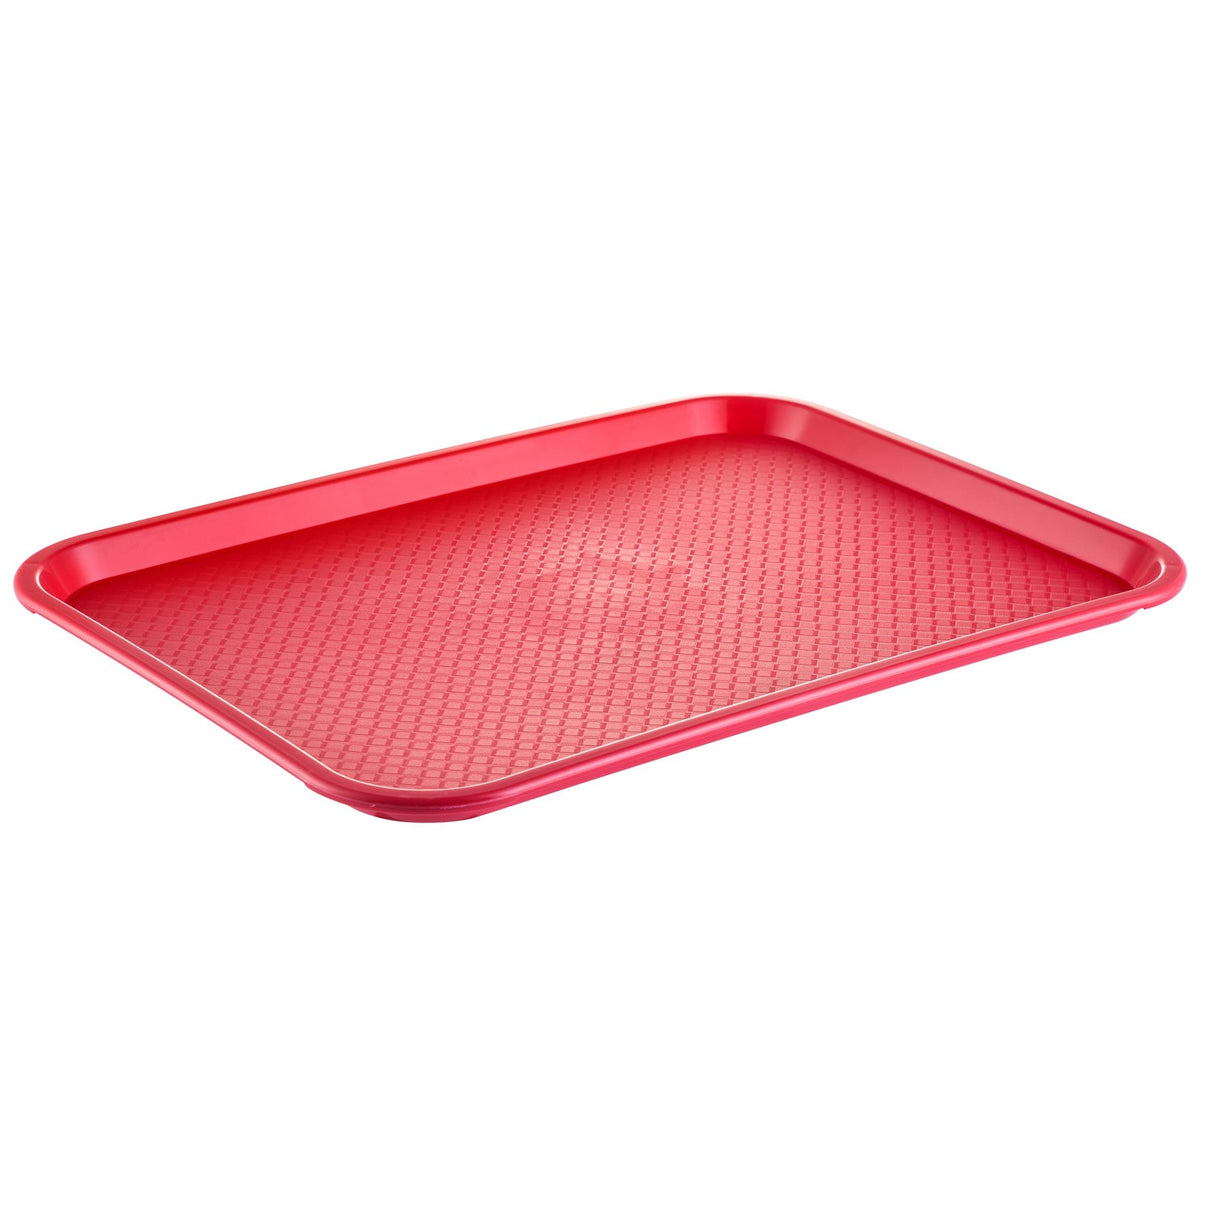 Tray PP Fast Food/Cafeteria Red 18x14"